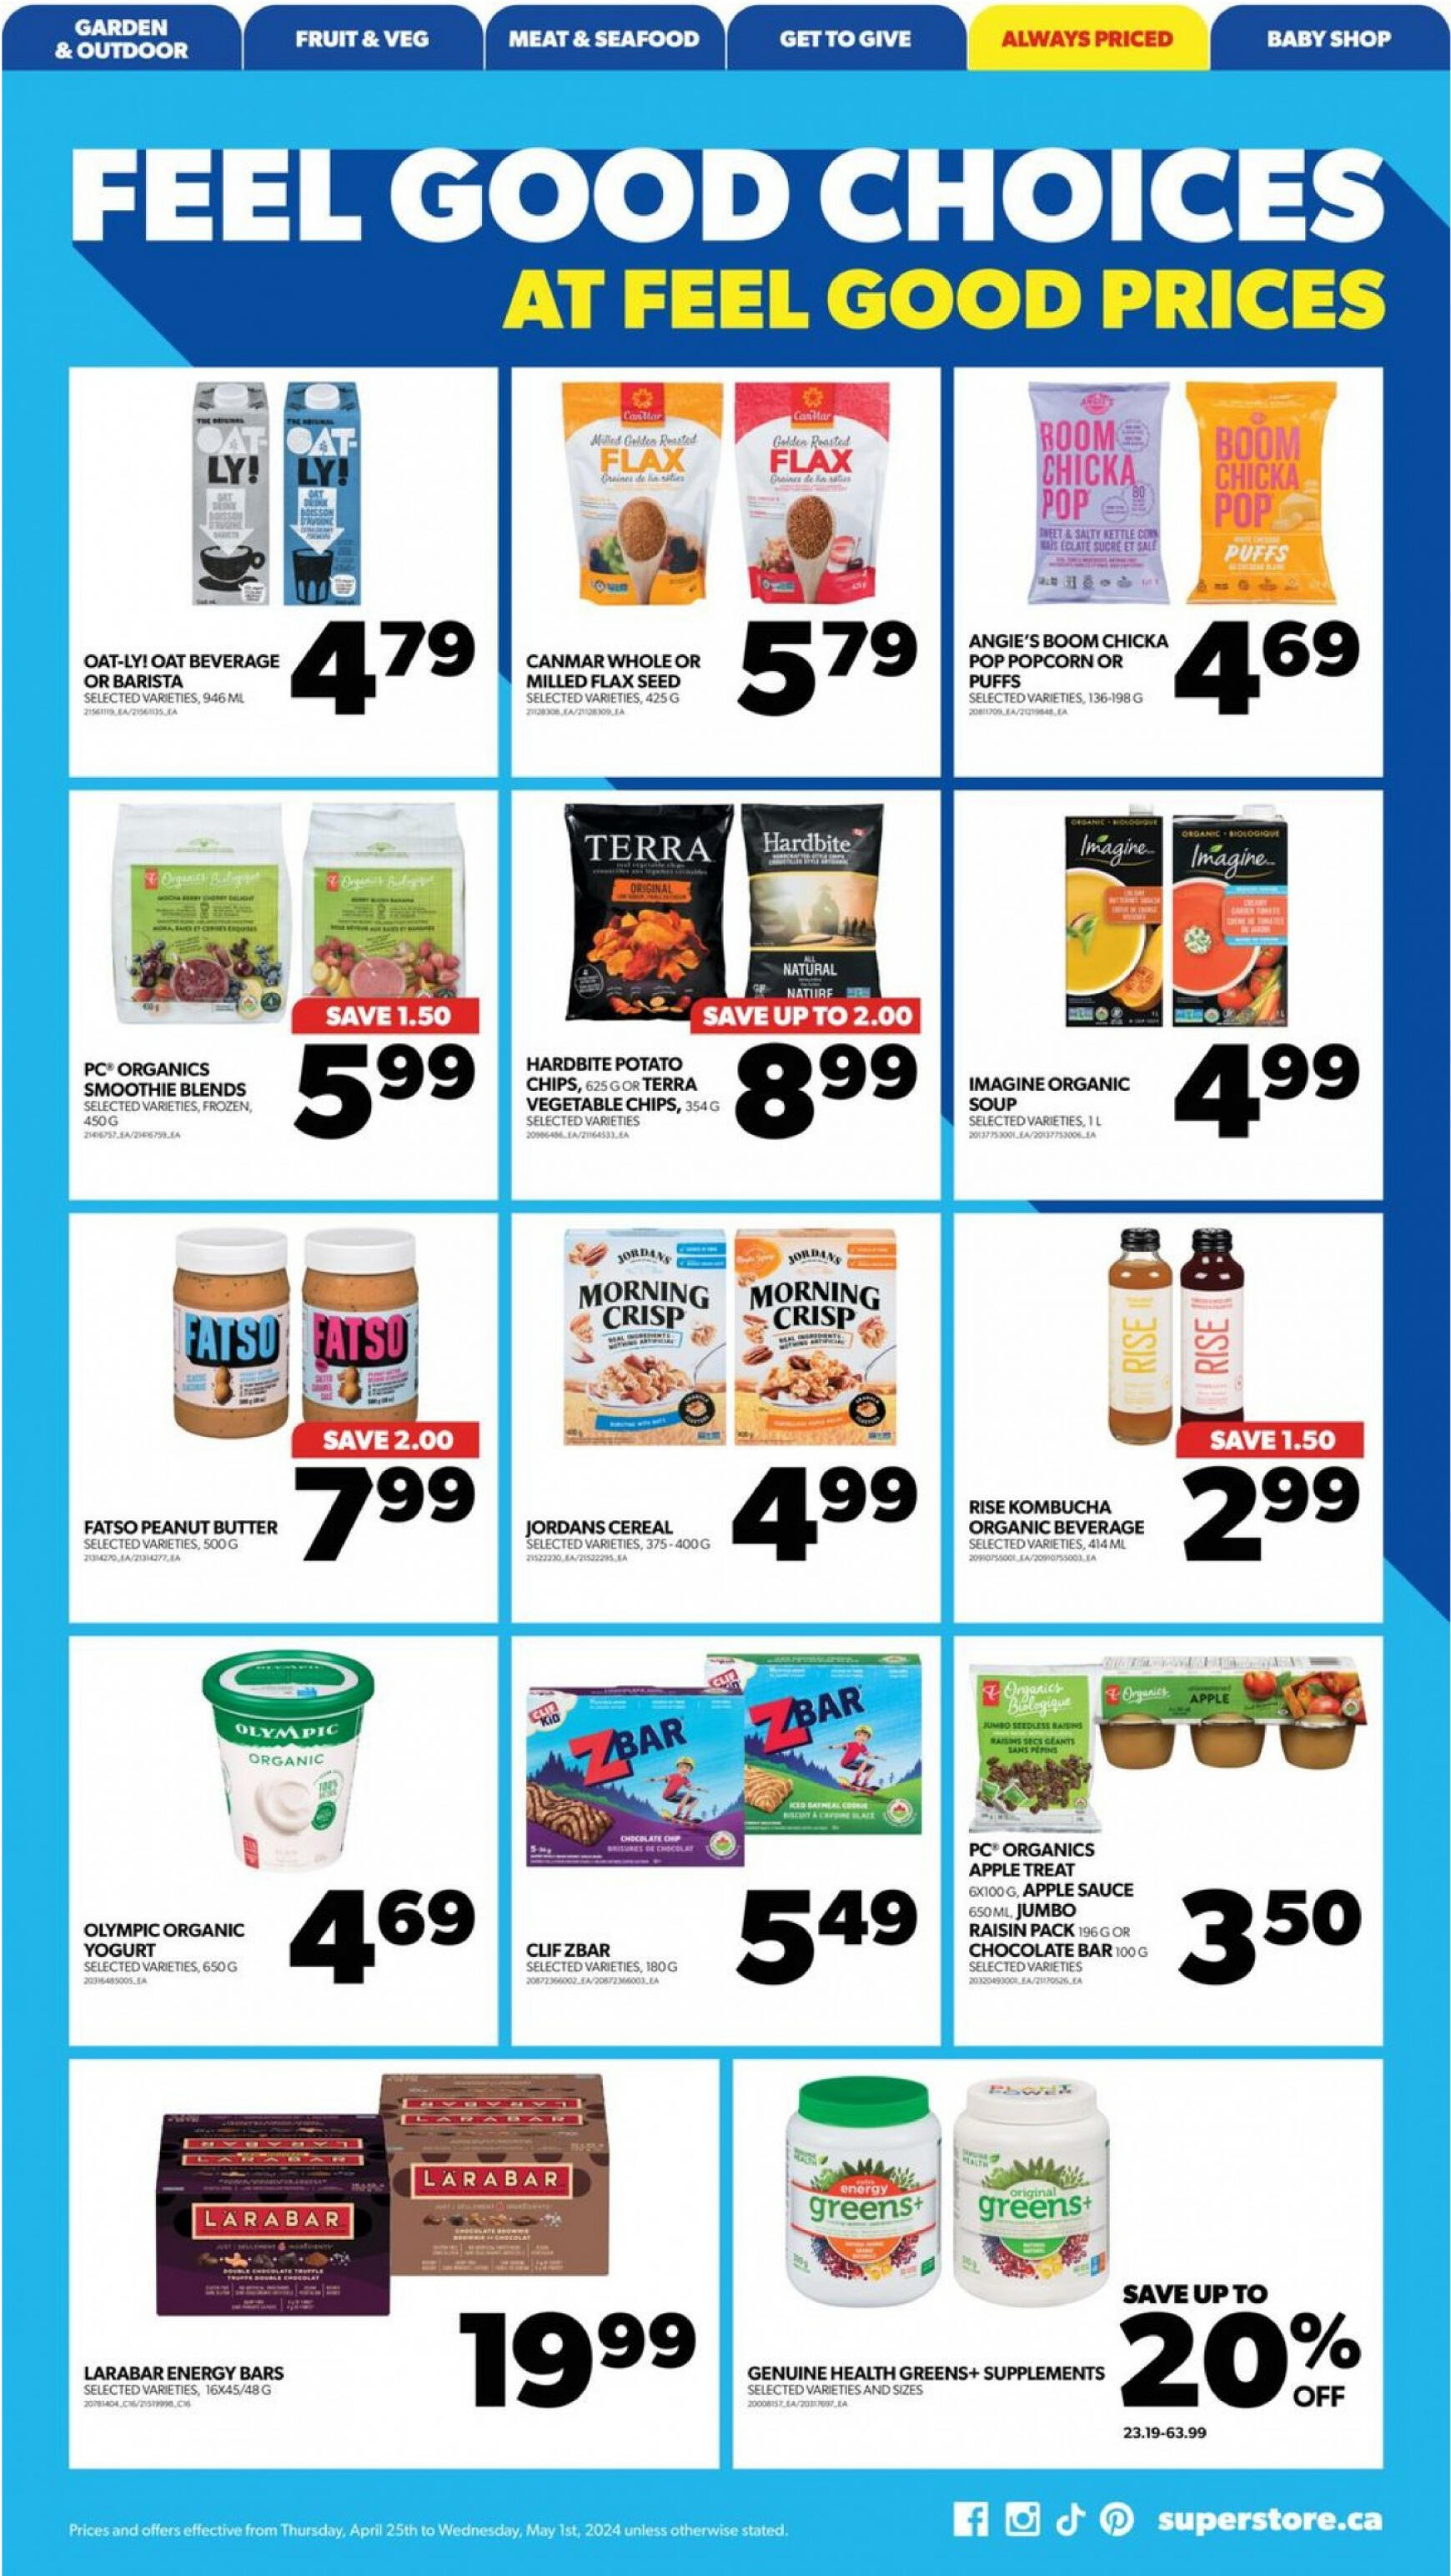 real-canadian-superstore - Real Canadian Superstore flyer current 01.05. - 31.05. - page: 18